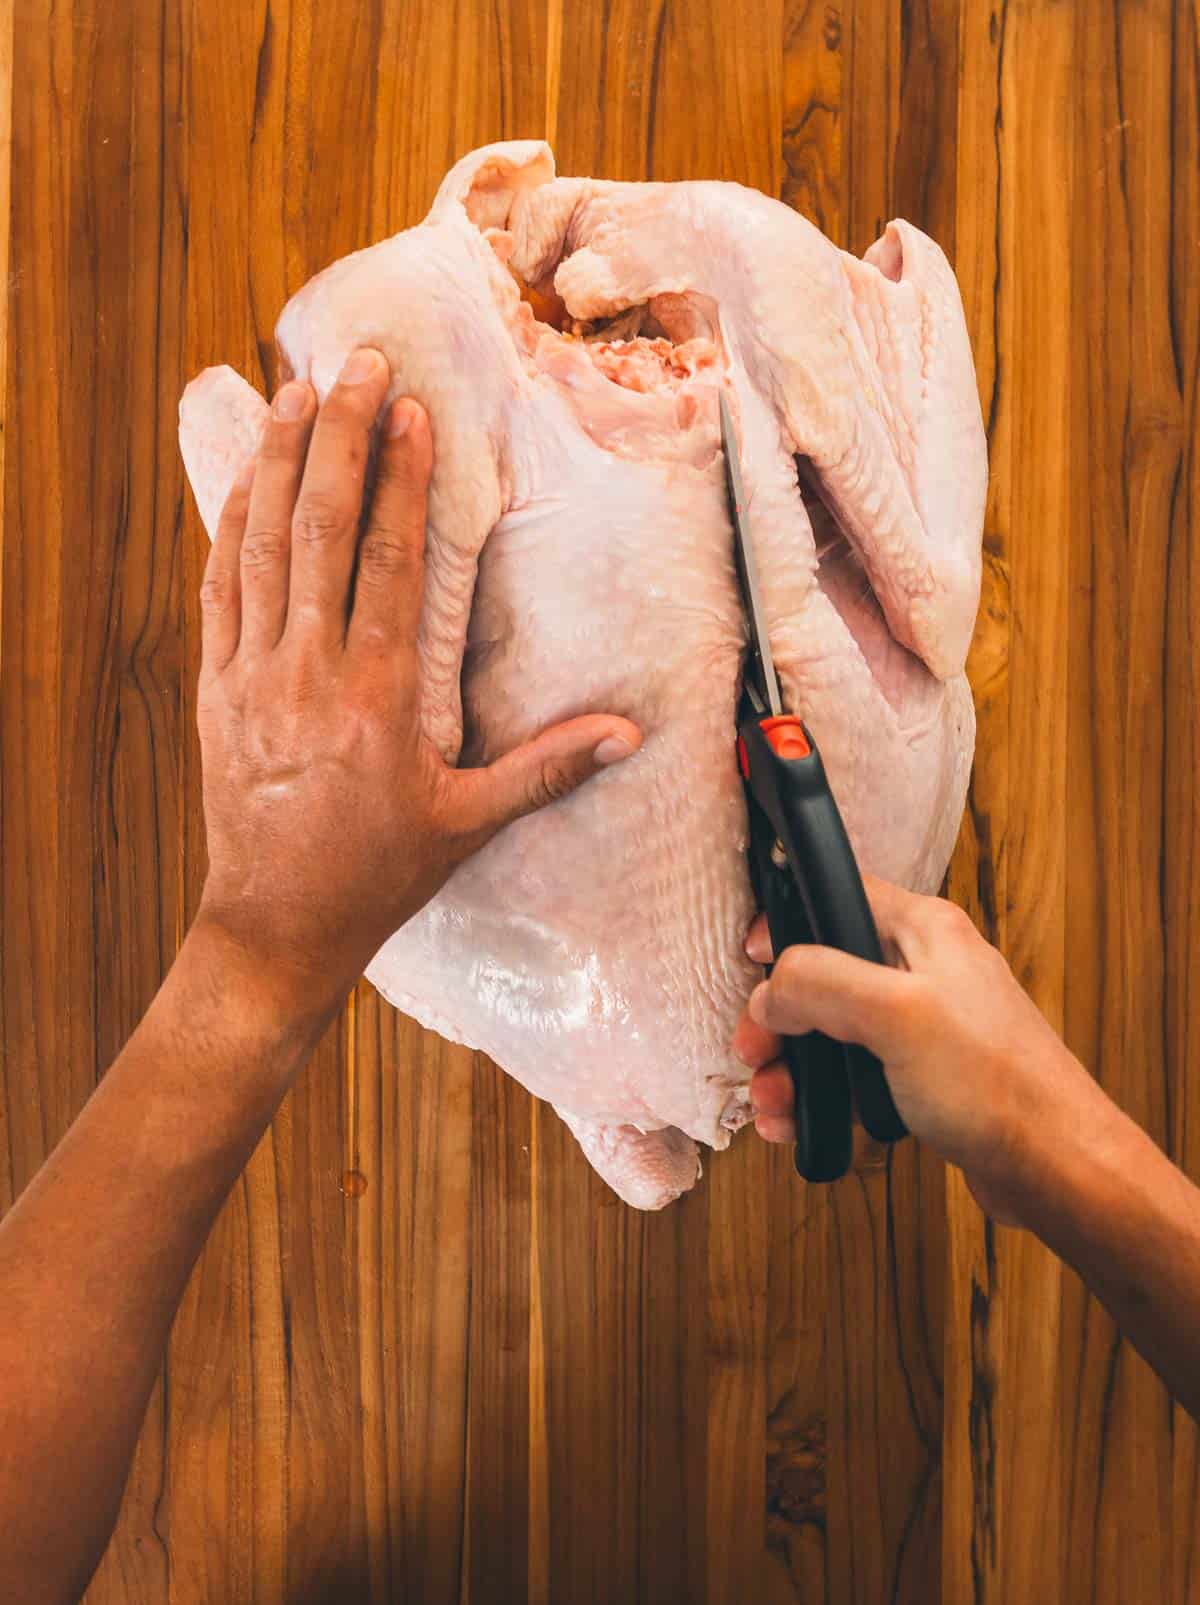 Cutting up the turkey to the neck.